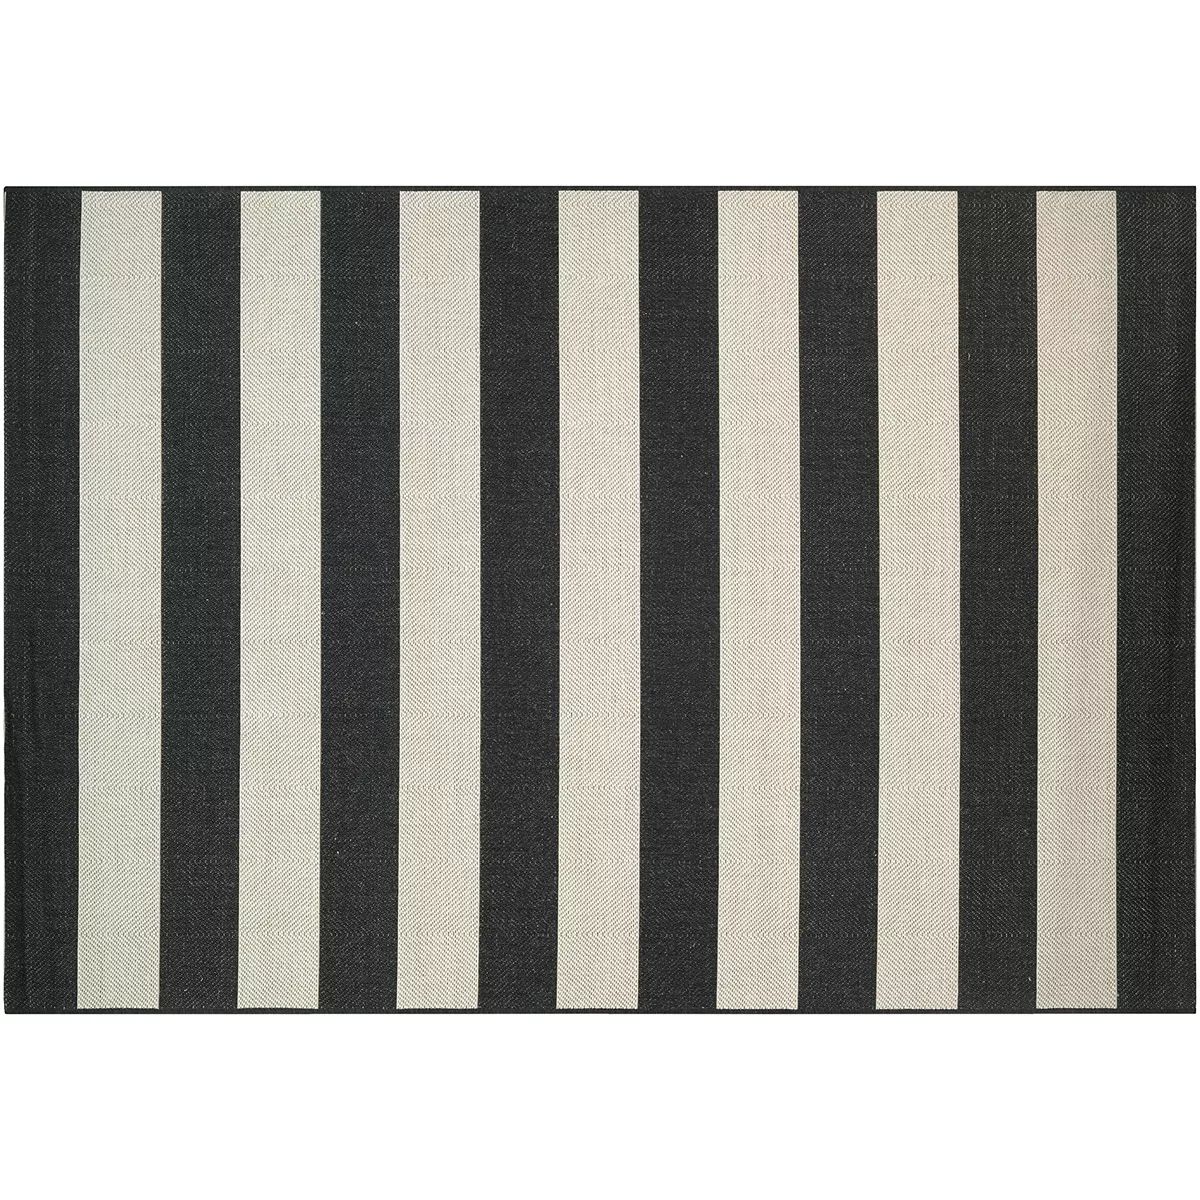 Couristan Afuera Yacht Club Striped Indoor Outdoor Rug | Kohl's